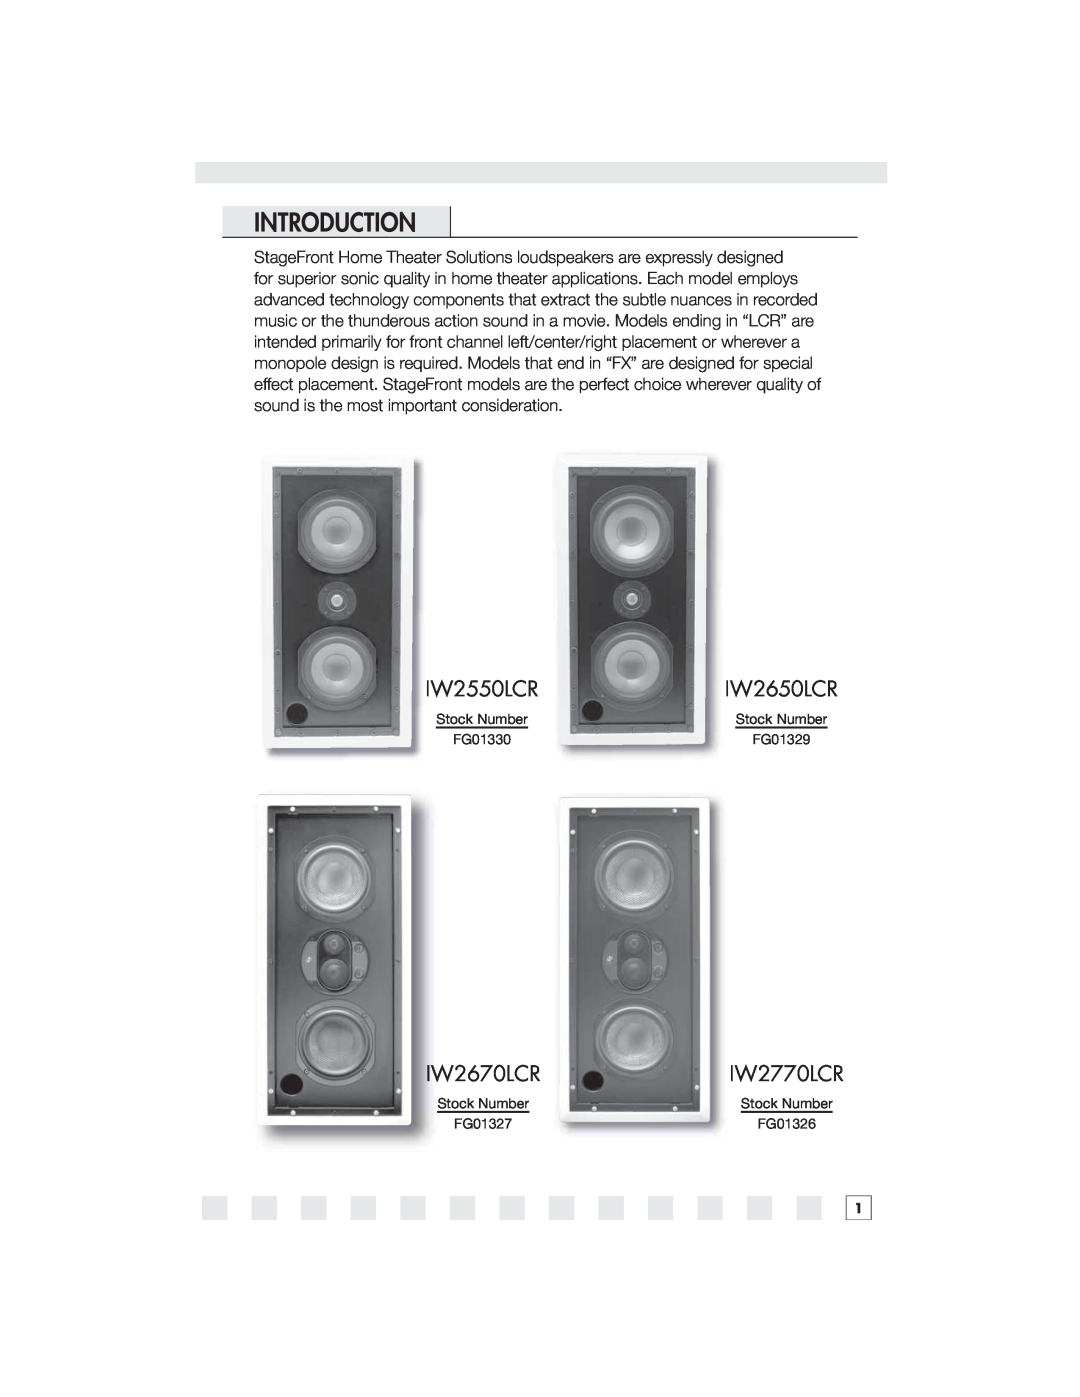 Niles Audio IW2670LCR manual Introduction, IW2550LCR, IW2650LCR, IW2770LCR 